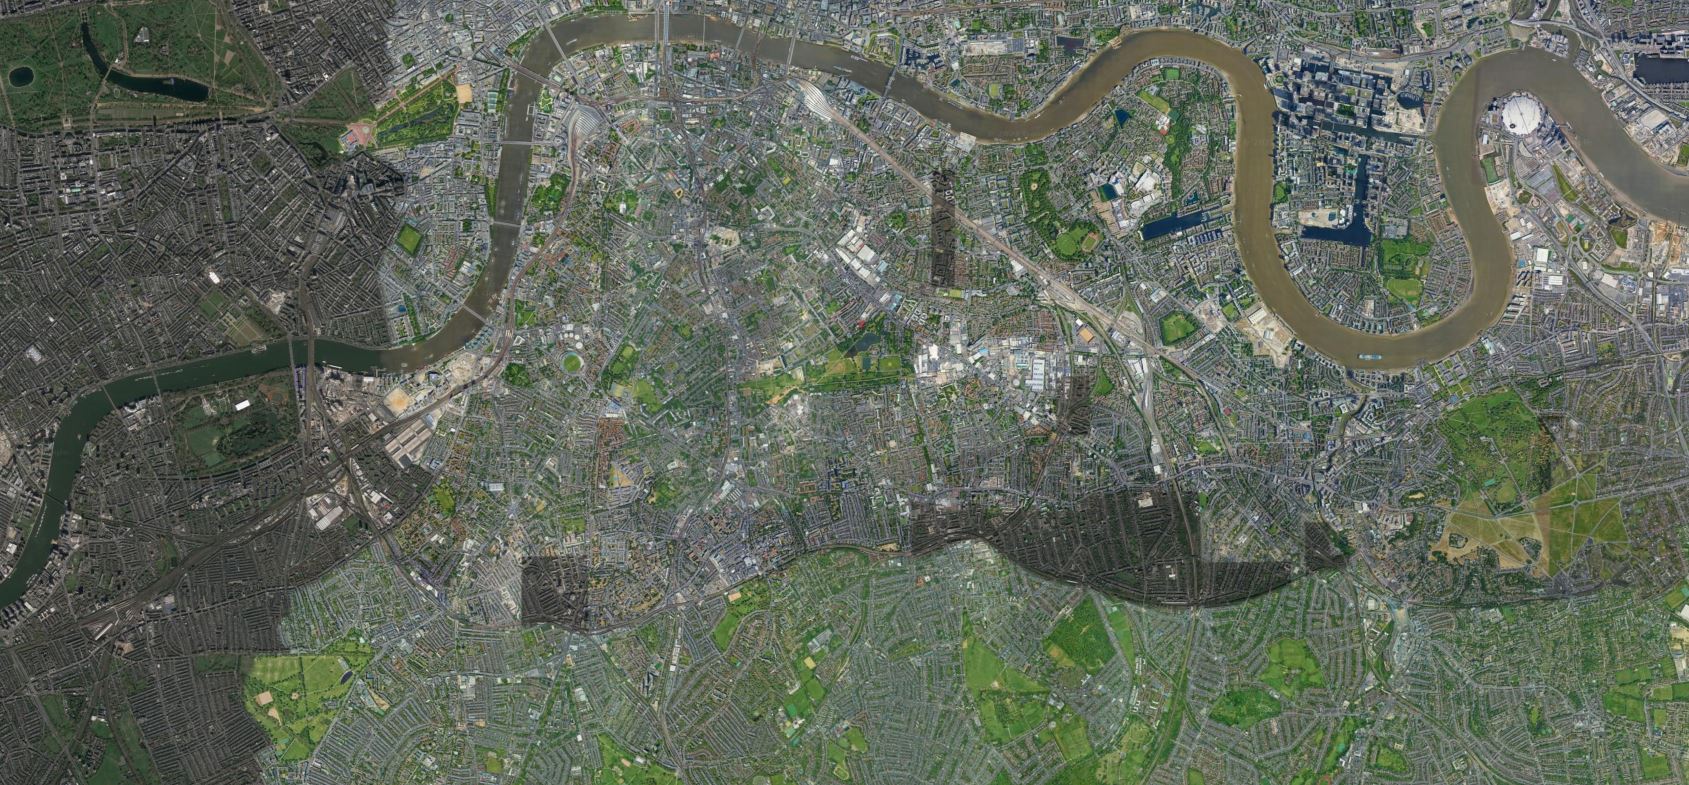 Lambeth and Southwark from above, Map data ©2021 Google